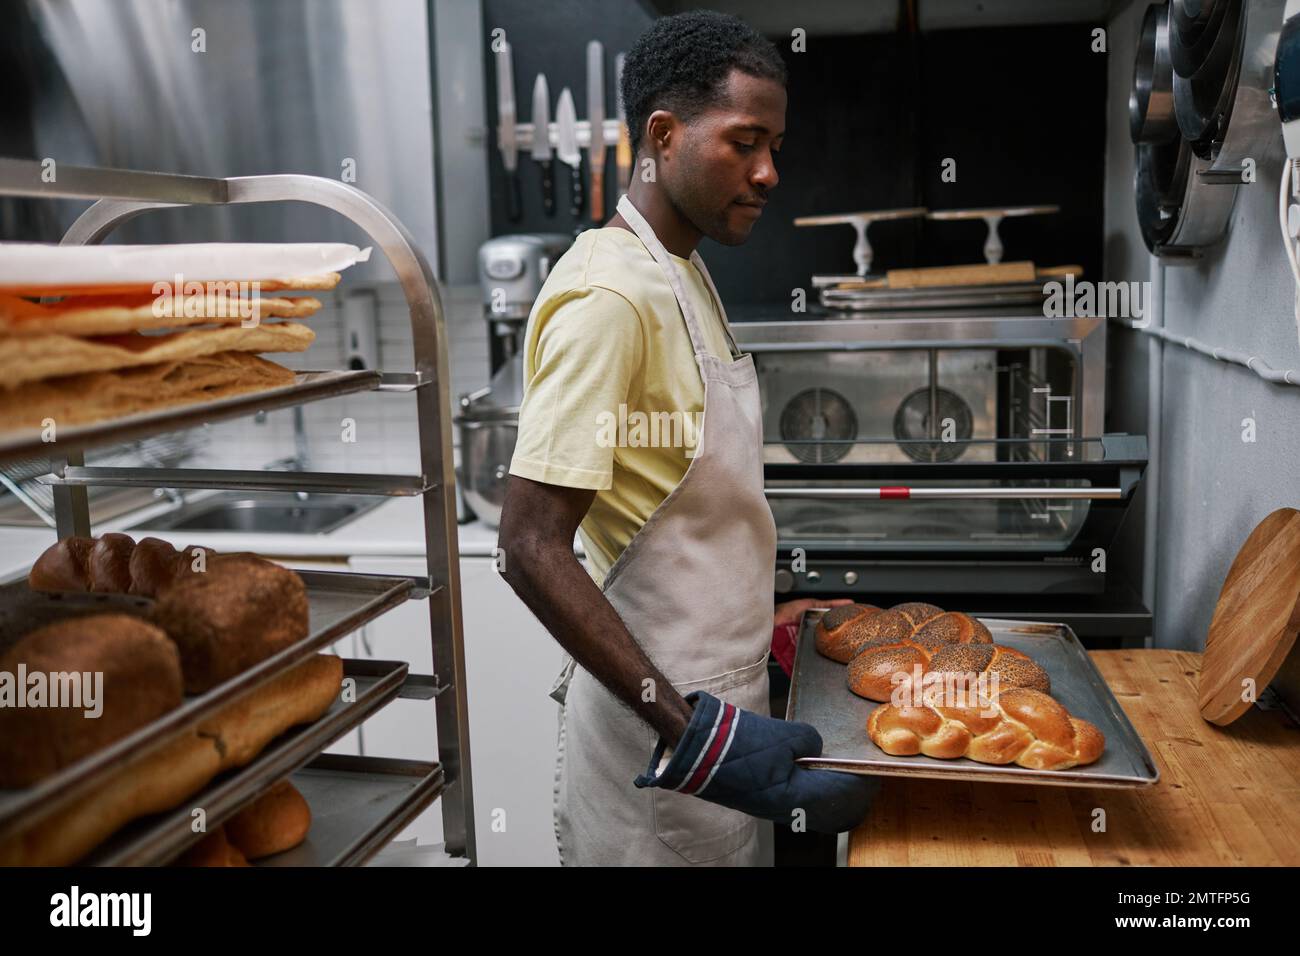 Bakery worker putting hot tray with freshly baked bread on table to let it cool Stock Photo